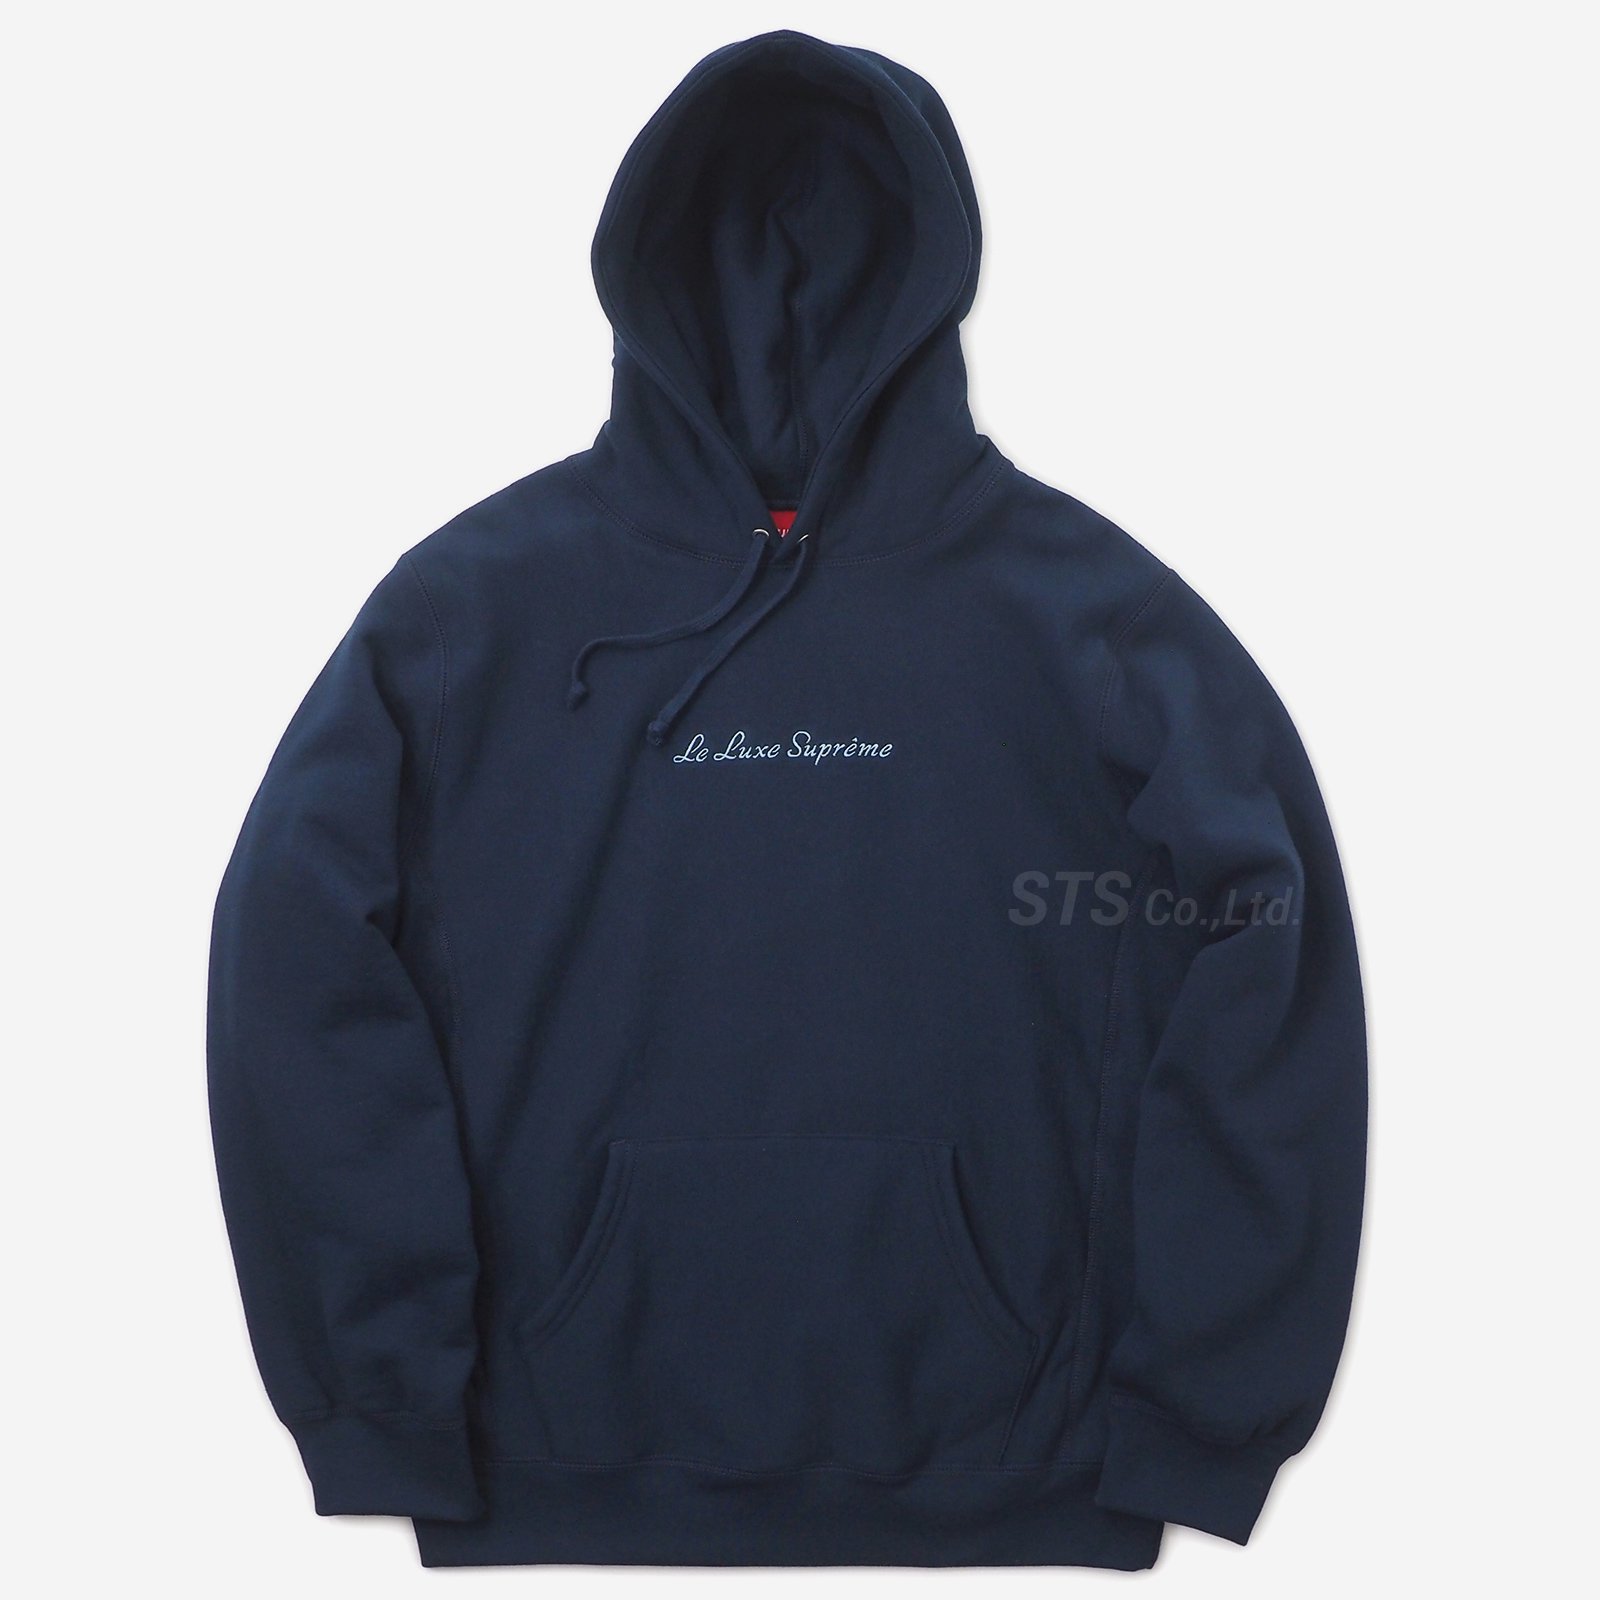 Supreme - Le Luxe Hooded Sweatshirt - ParkSIDER